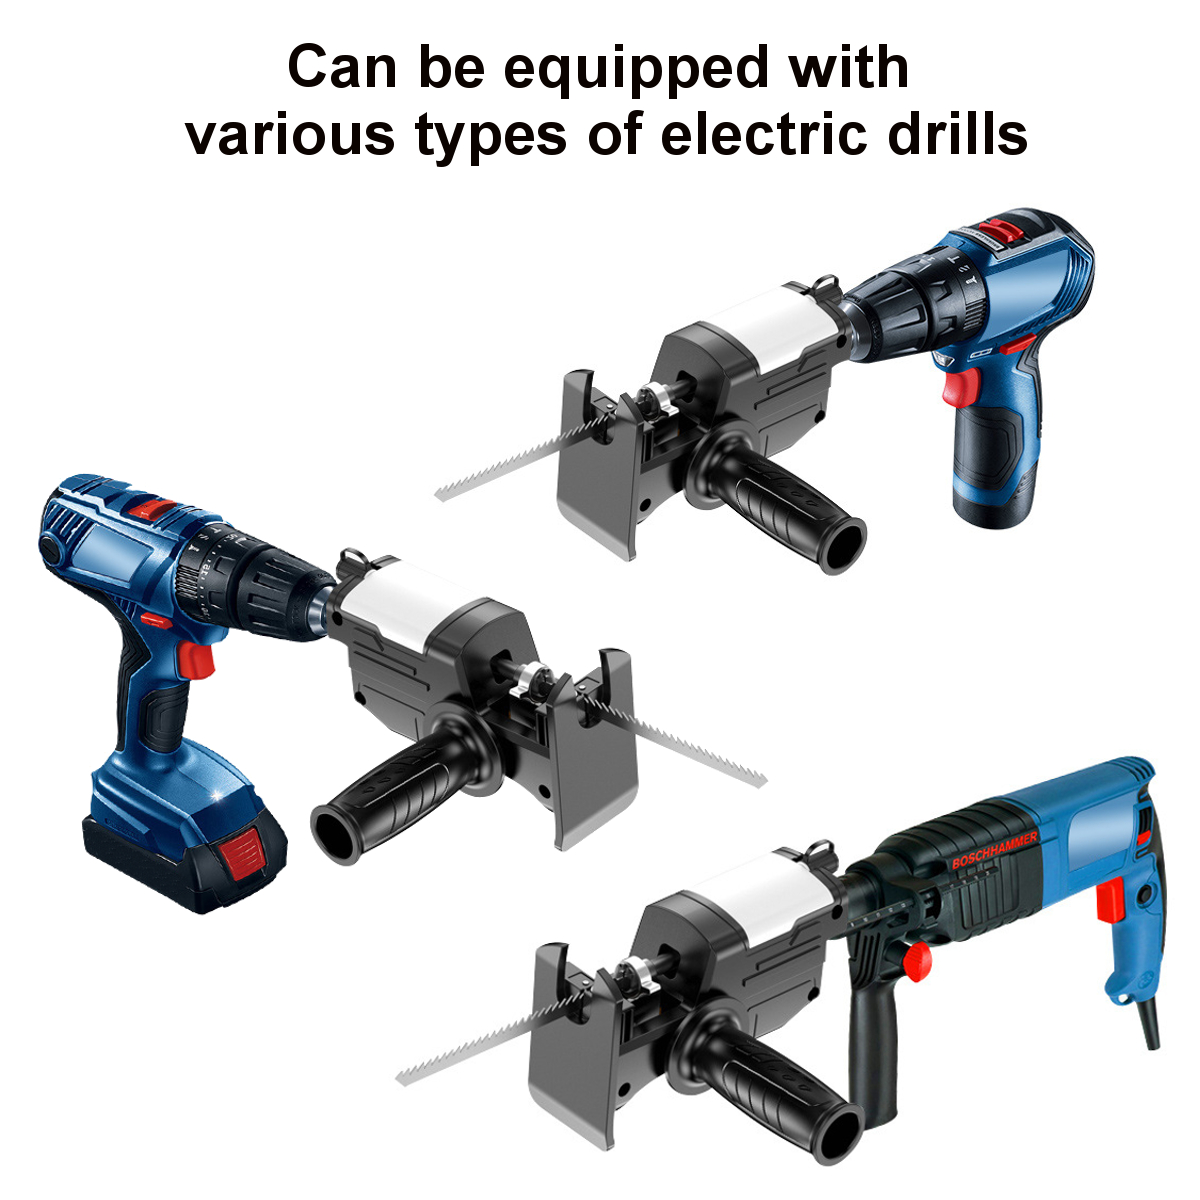 3915Pcs-Saw-Blade-Electric-Drill-Modified-Electric-Saw-Electric-Reciprocating-Saw-Power-Drill-to-Jig-1843195-8